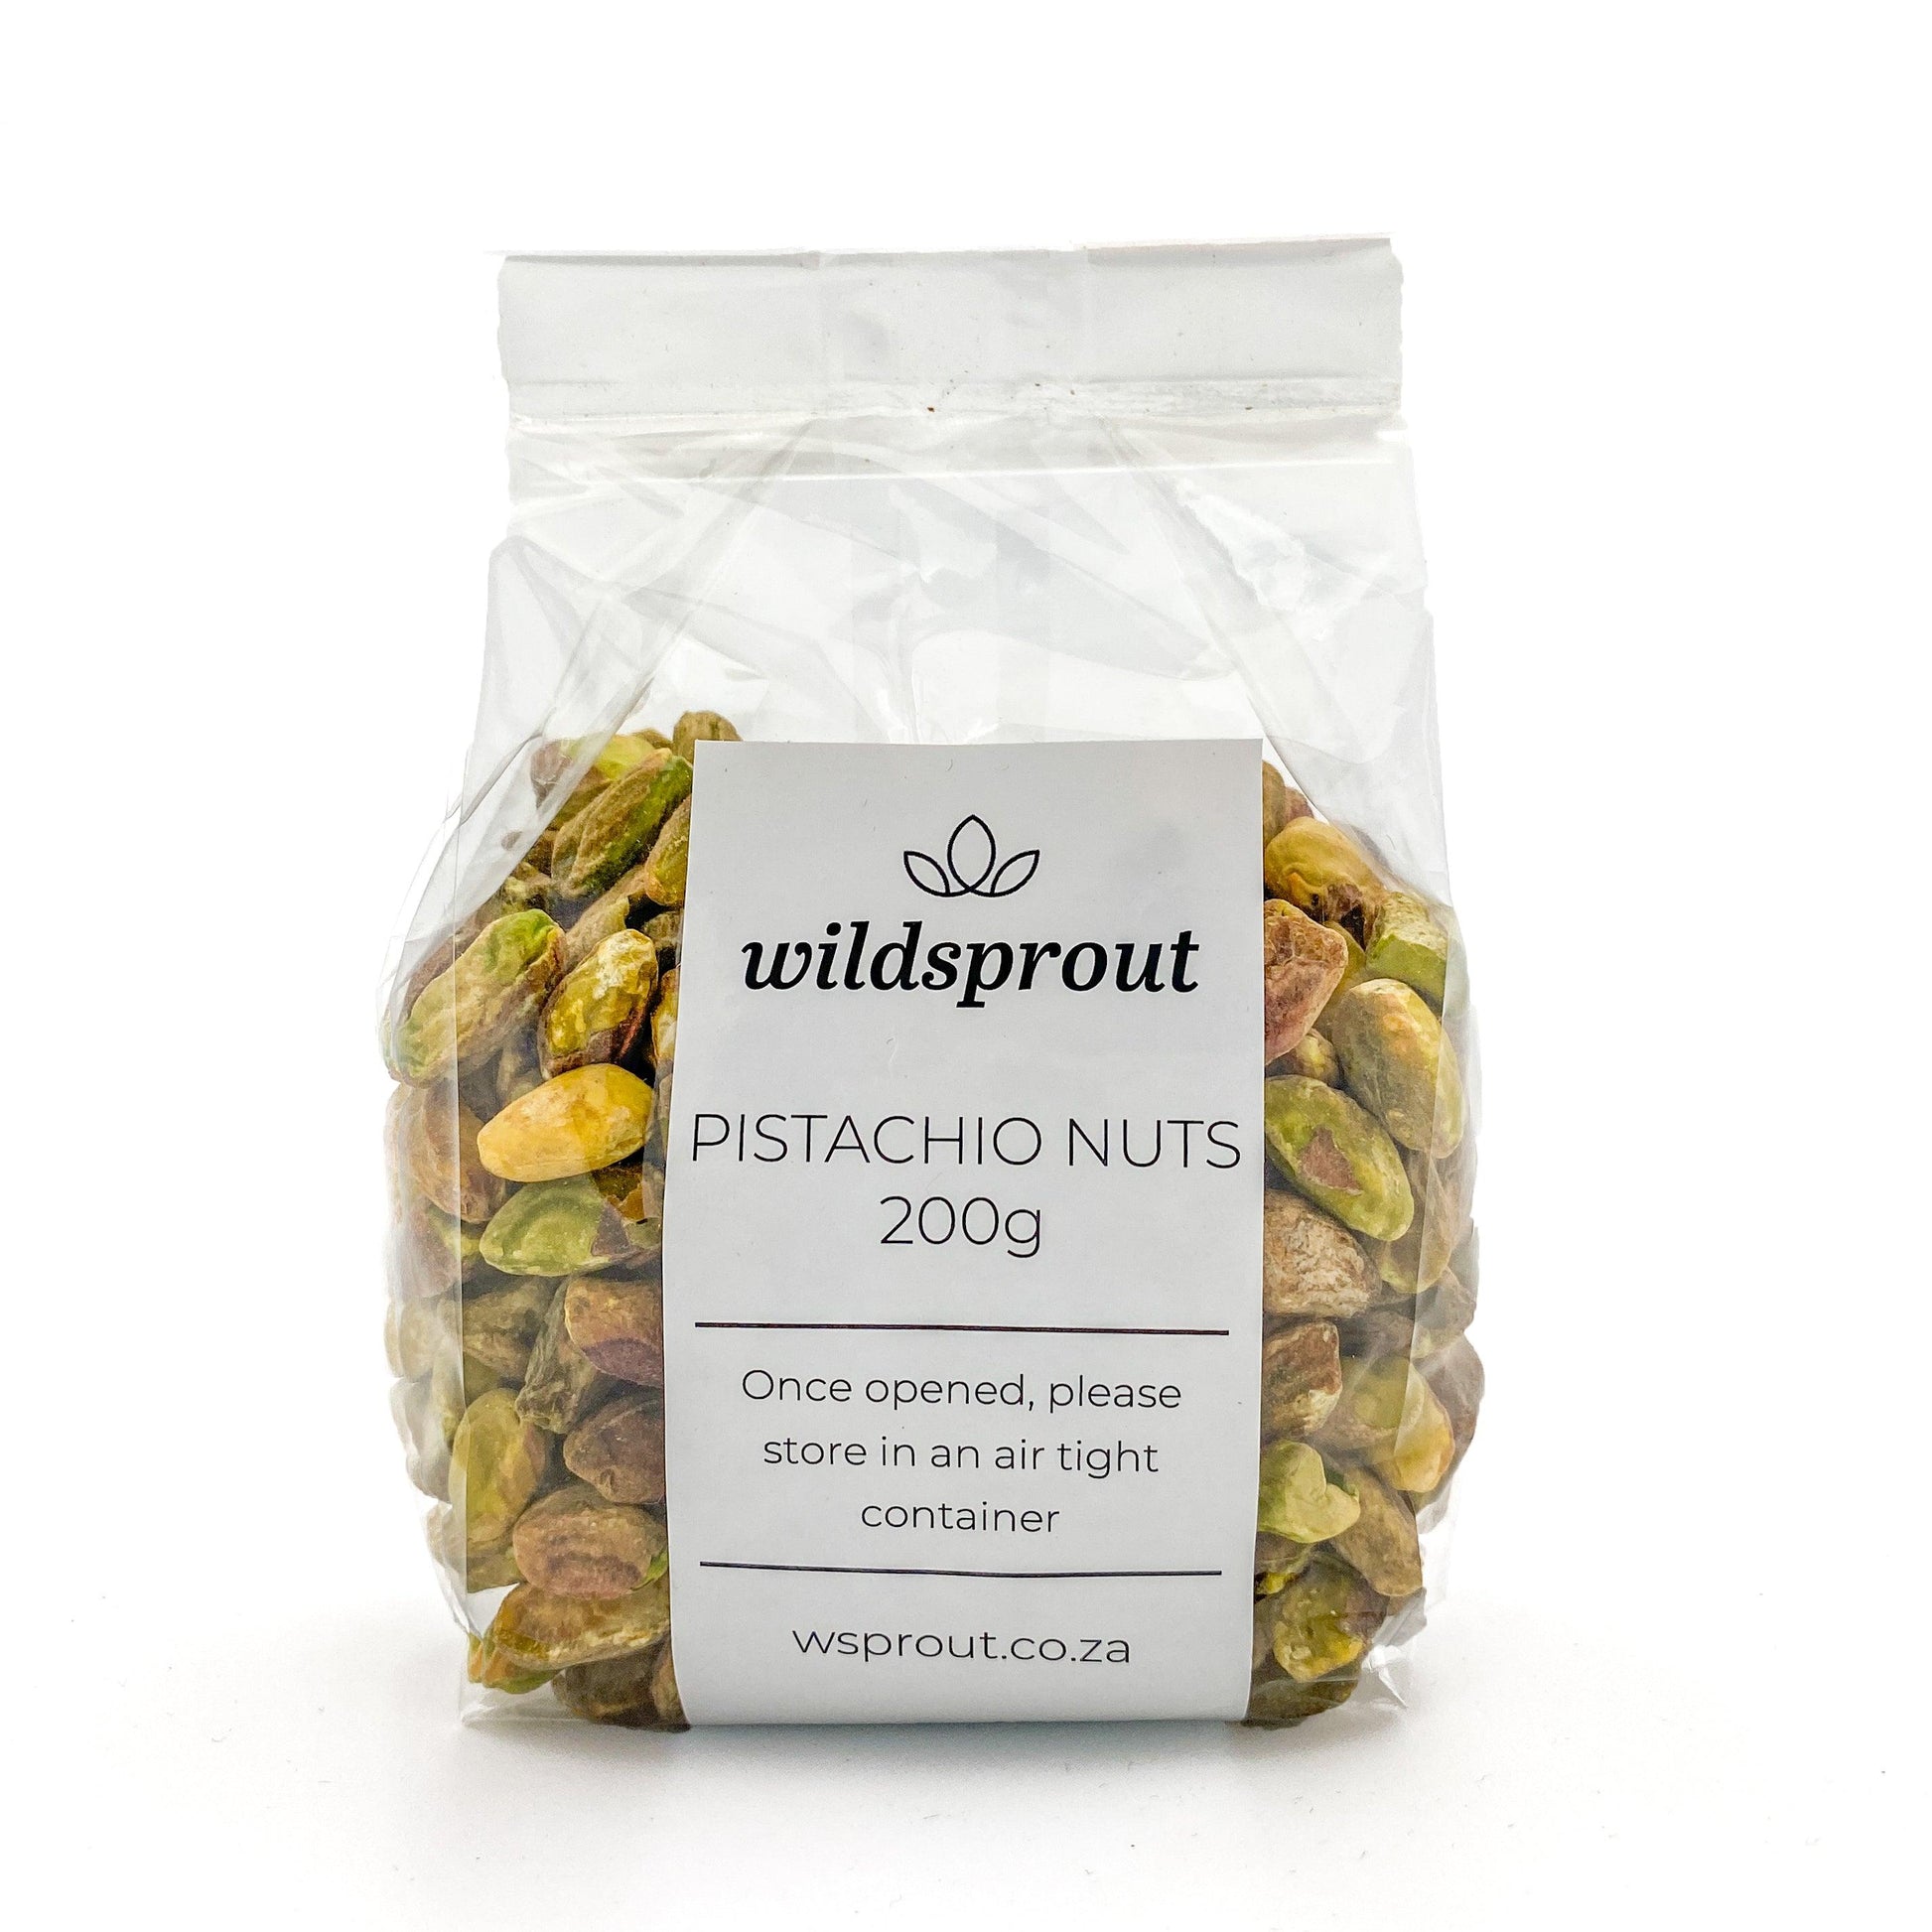 Pistachio Nuts 200g - Wildsprout